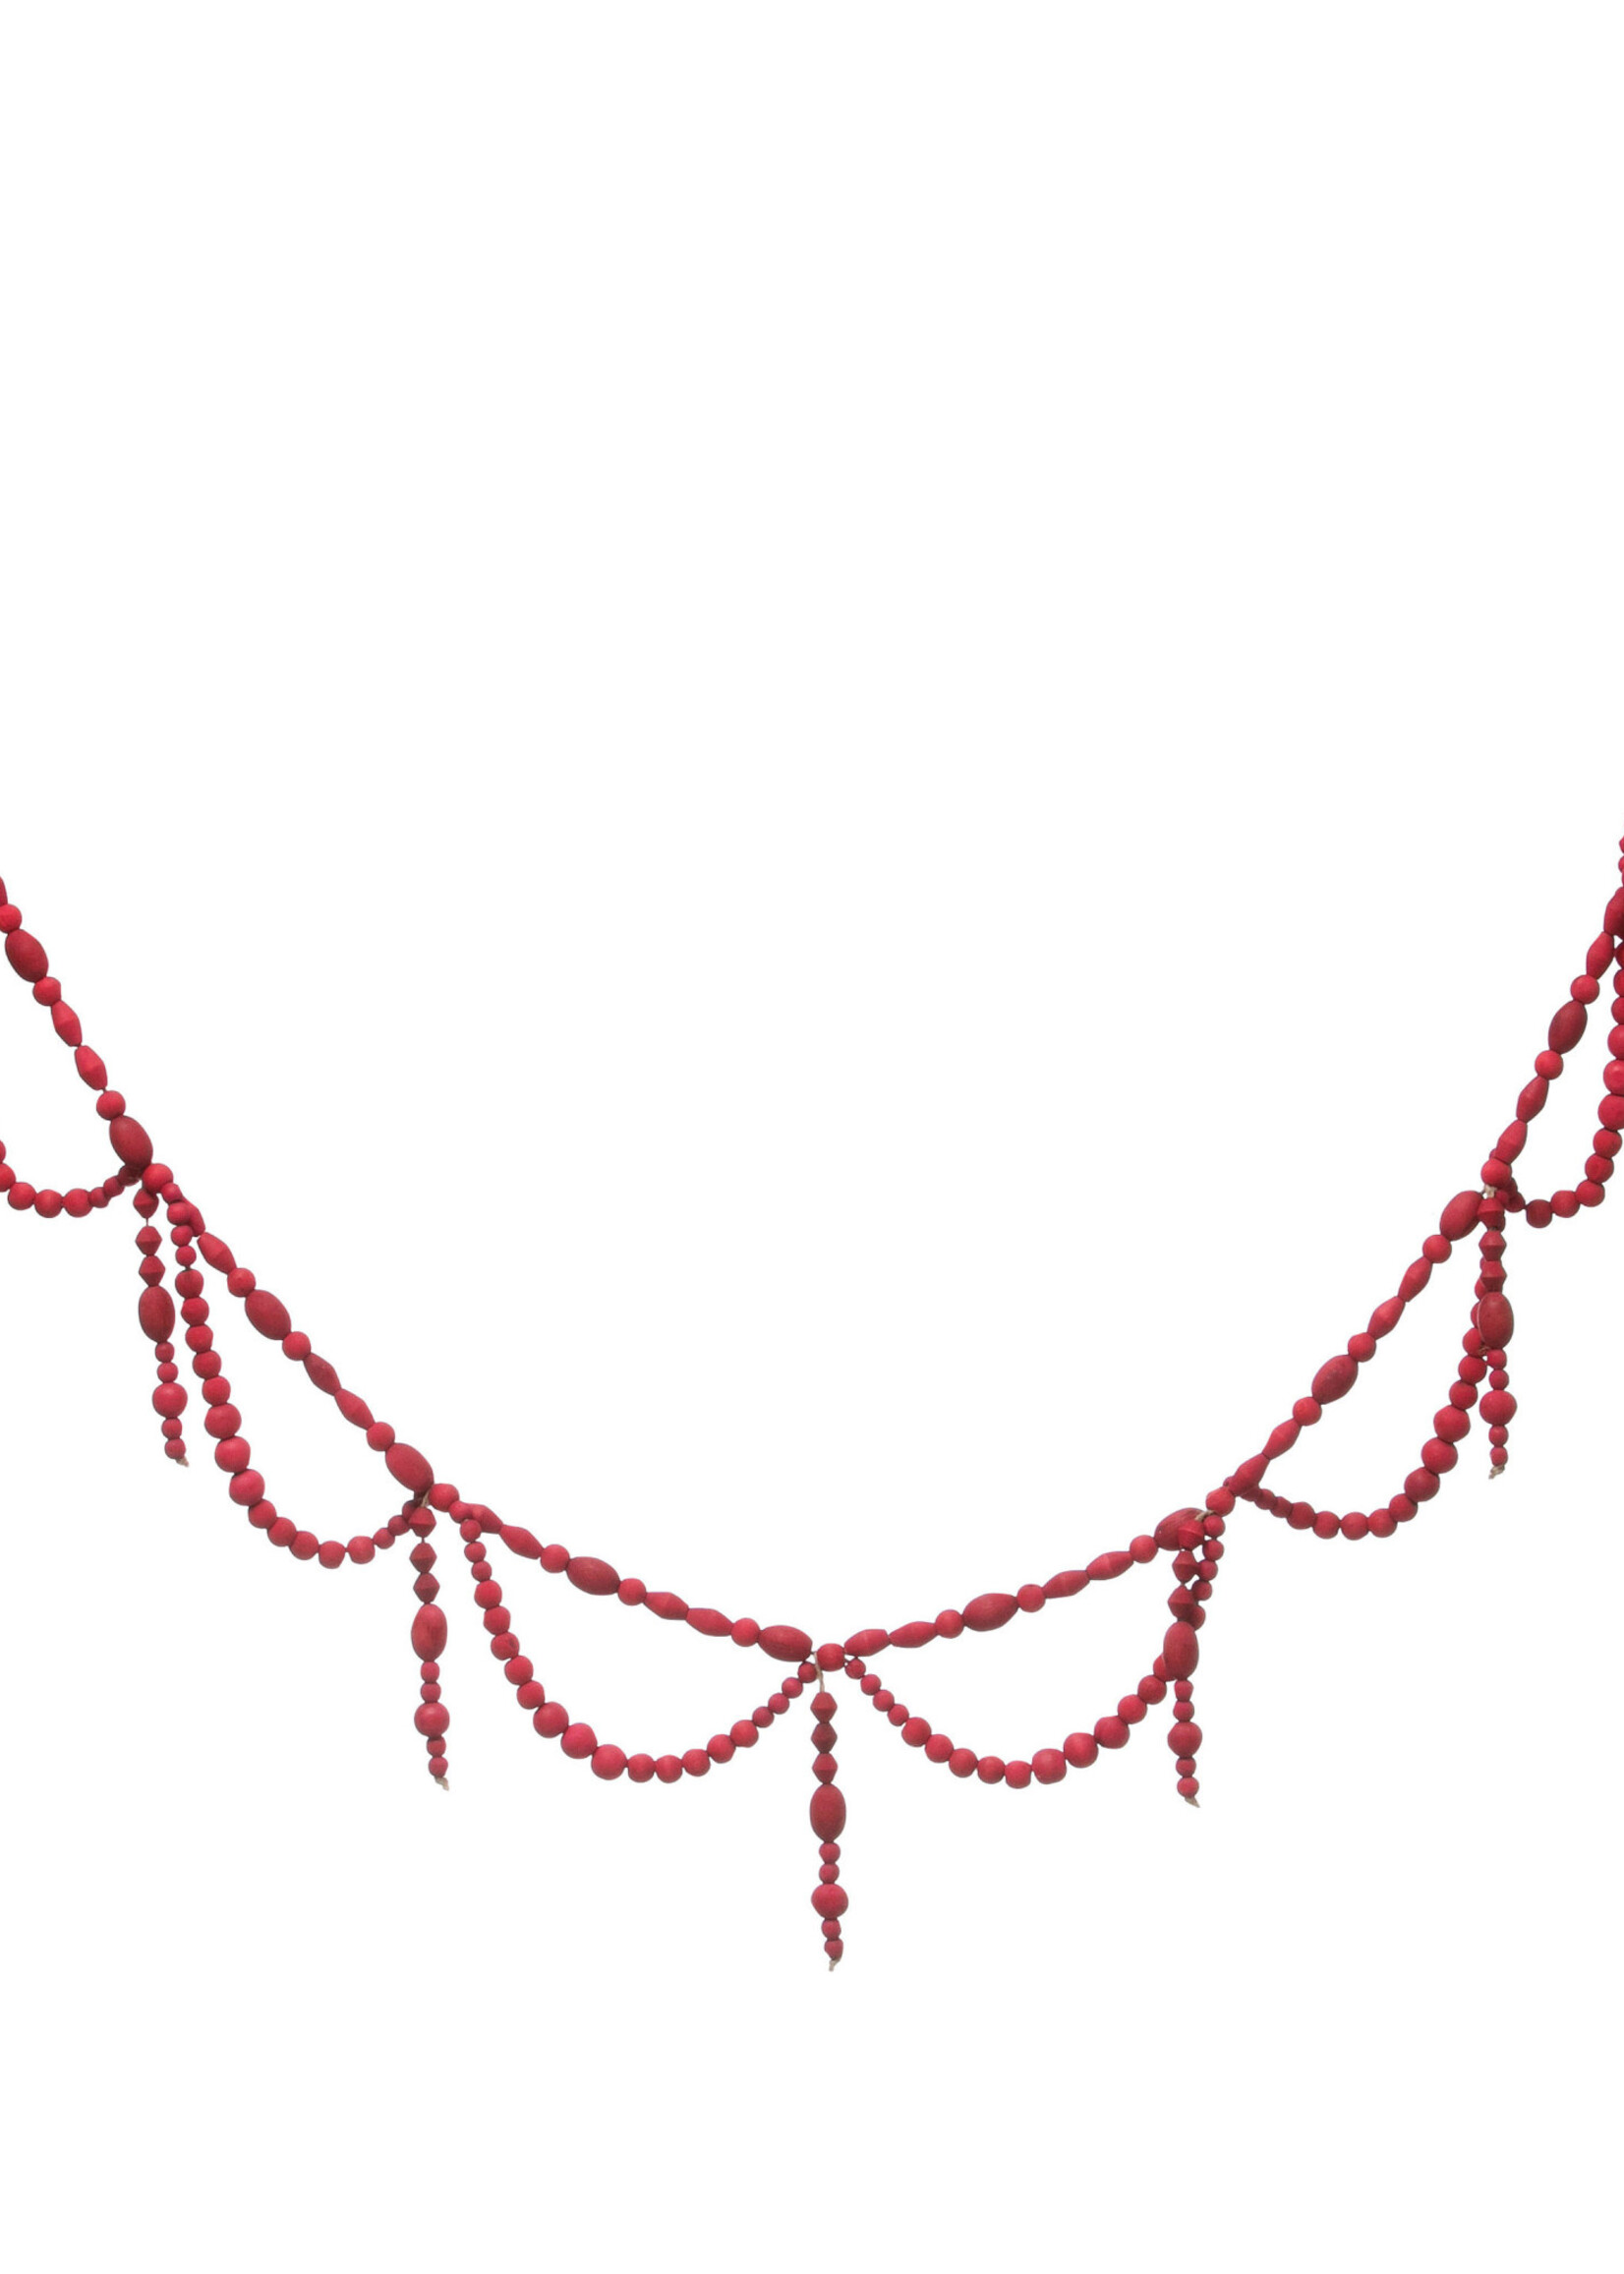 Wood Bead Swag Garland - Red